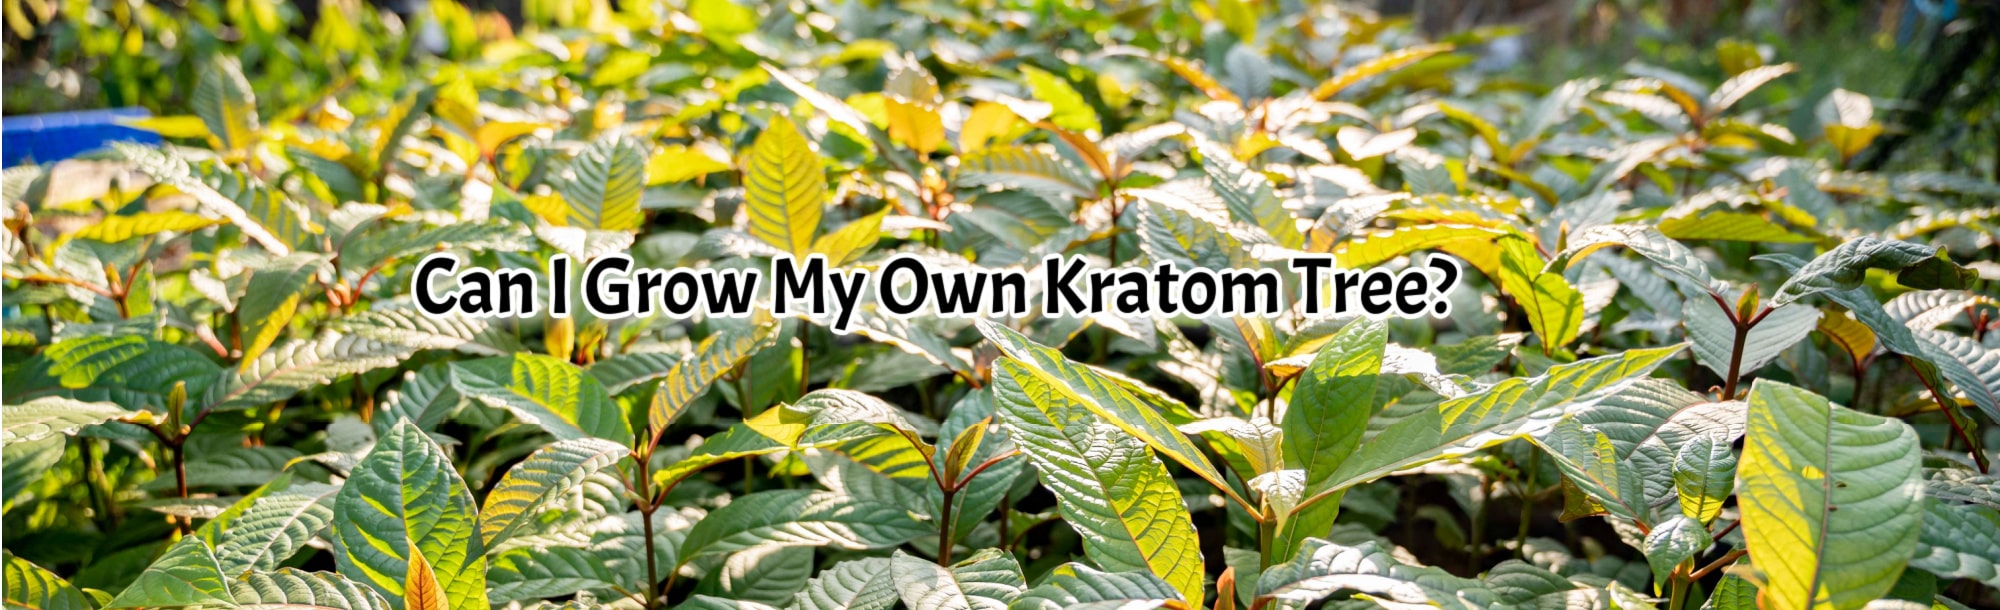 Growing Kratom: What You Need to Know